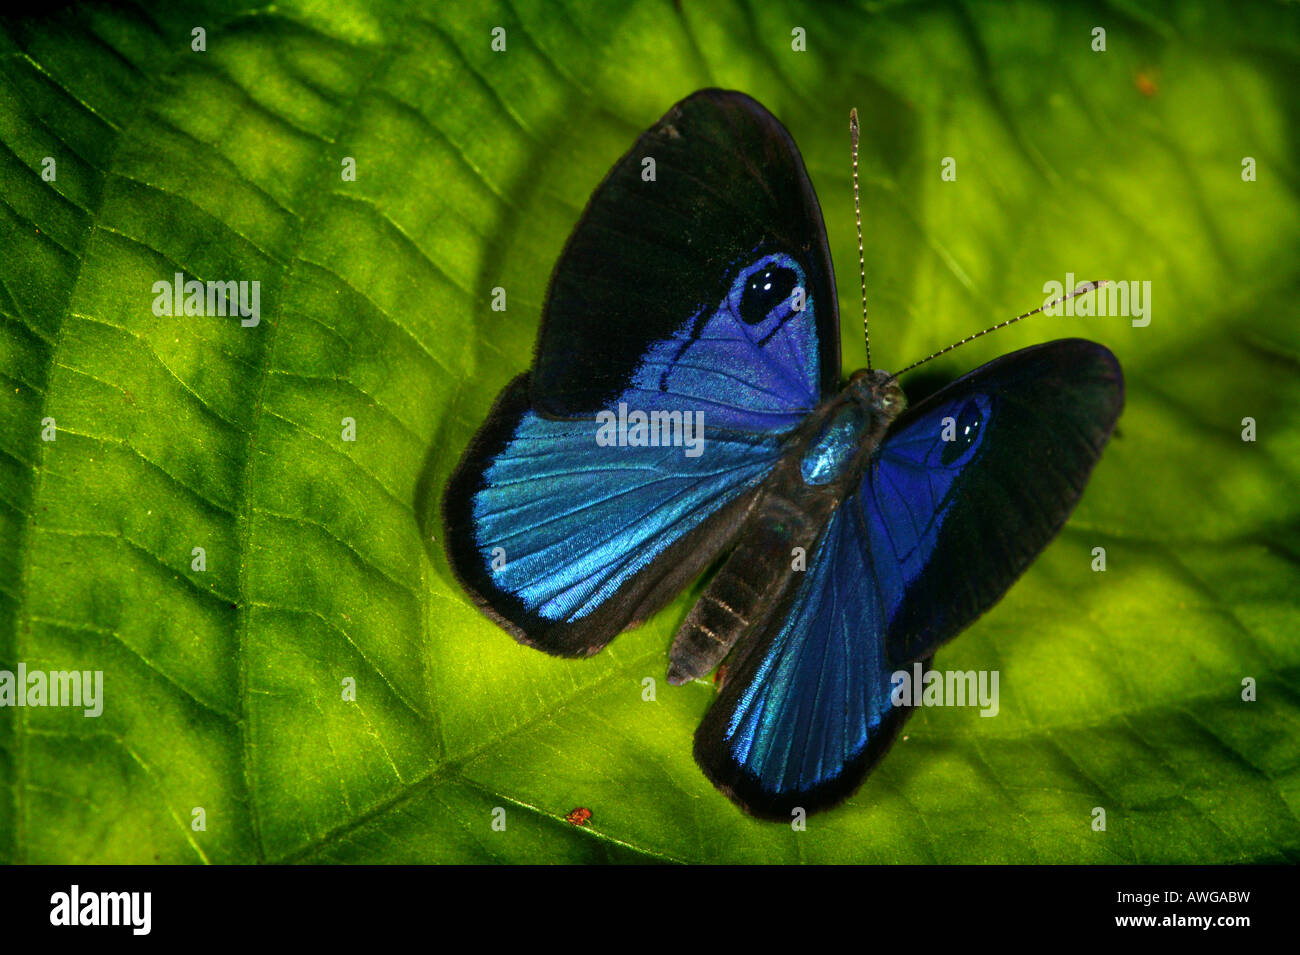 Blue butterfly near Cana field station in the Darien national park, Darien province, Republic of Panama. Stock Photo